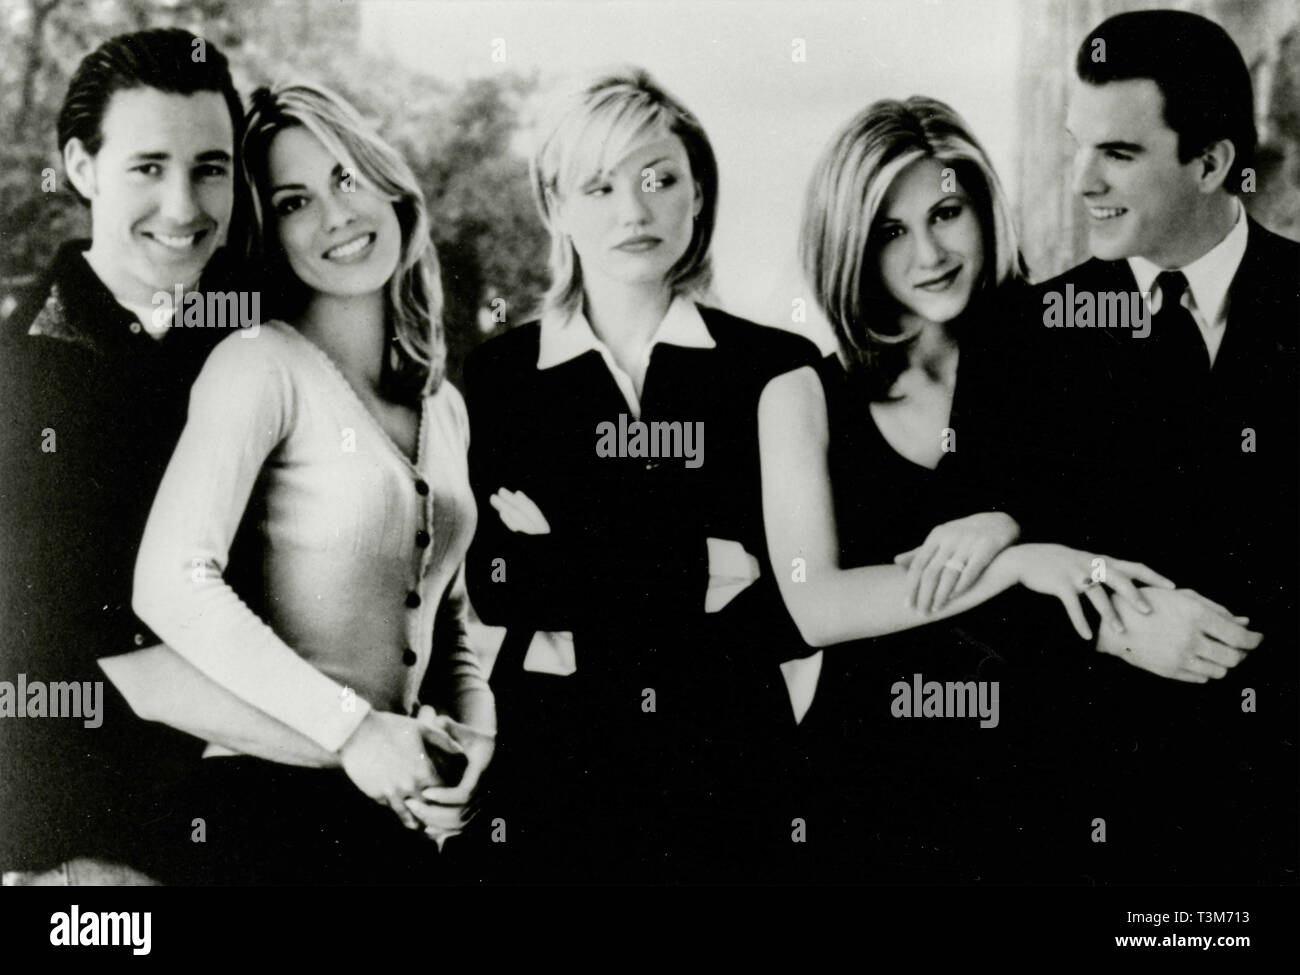 Edward Burns, Maxime Bahns, Cameron Diaz, Jennifer Aniston, and Mike McGlone in the movie She's the One, 1996 Stock Photo